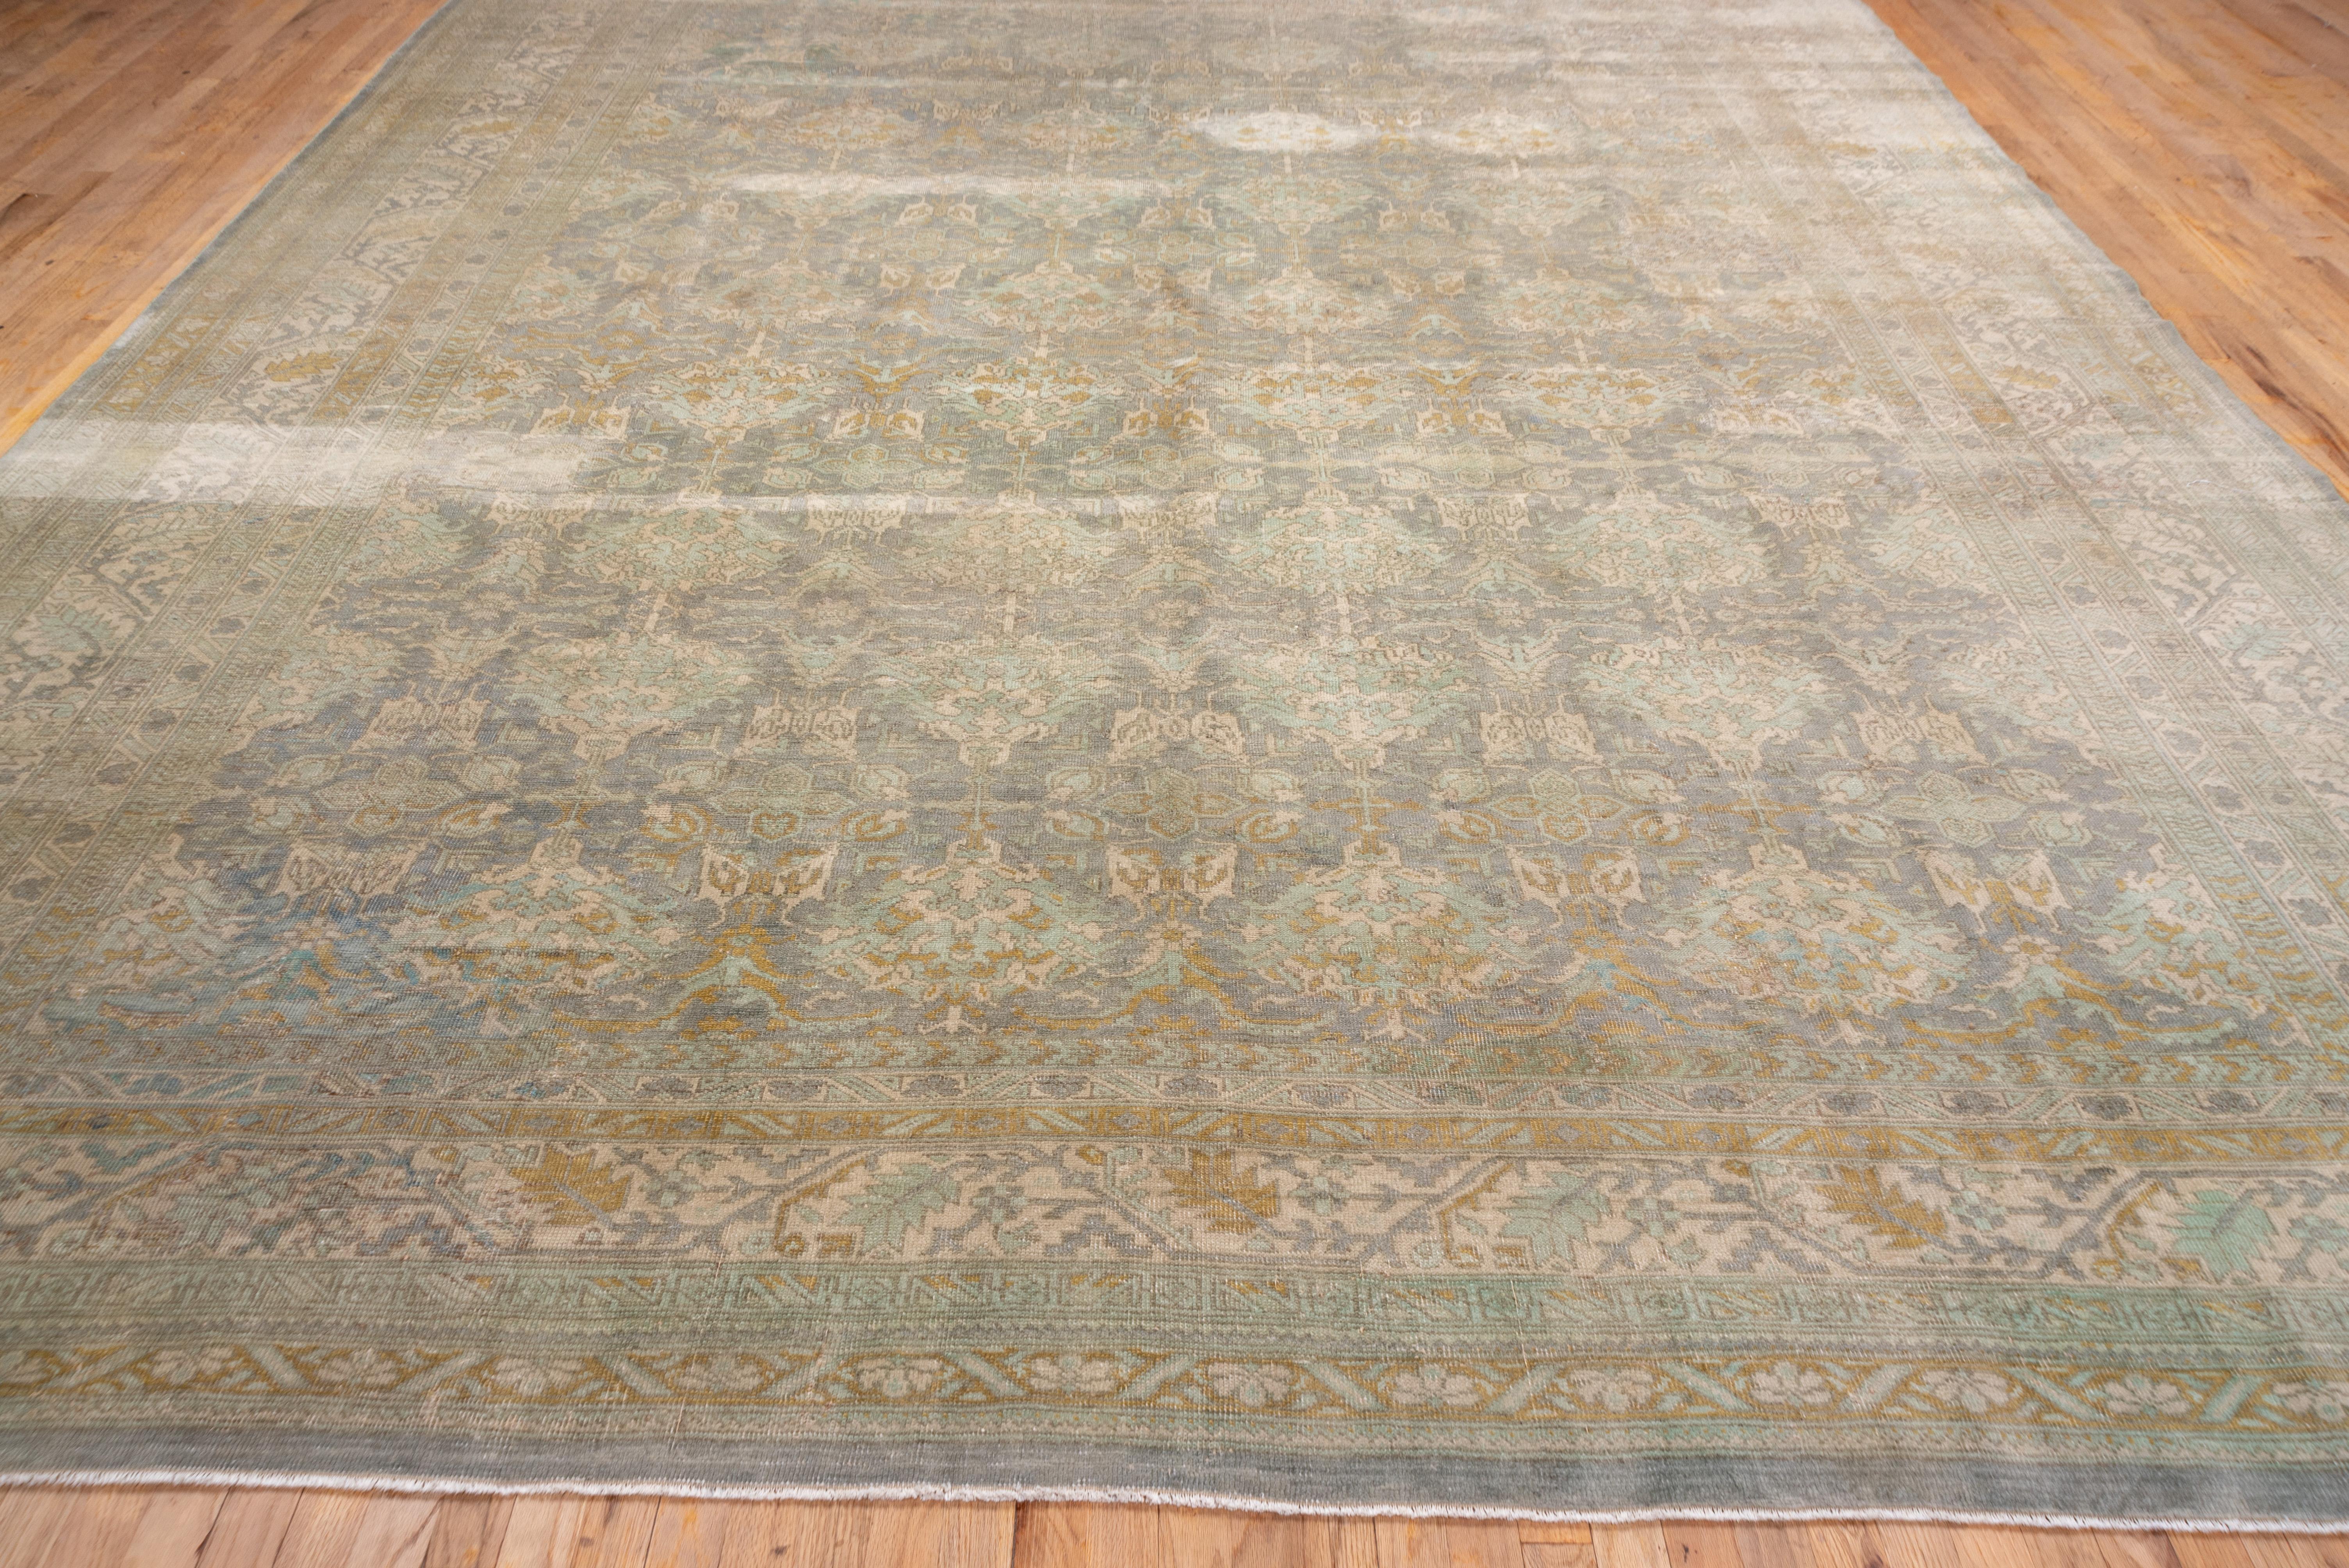 Turkish Room Sized Antique Oushak Rug, Gray & Seafoam Allover Field, Lightly Distressed For Sale